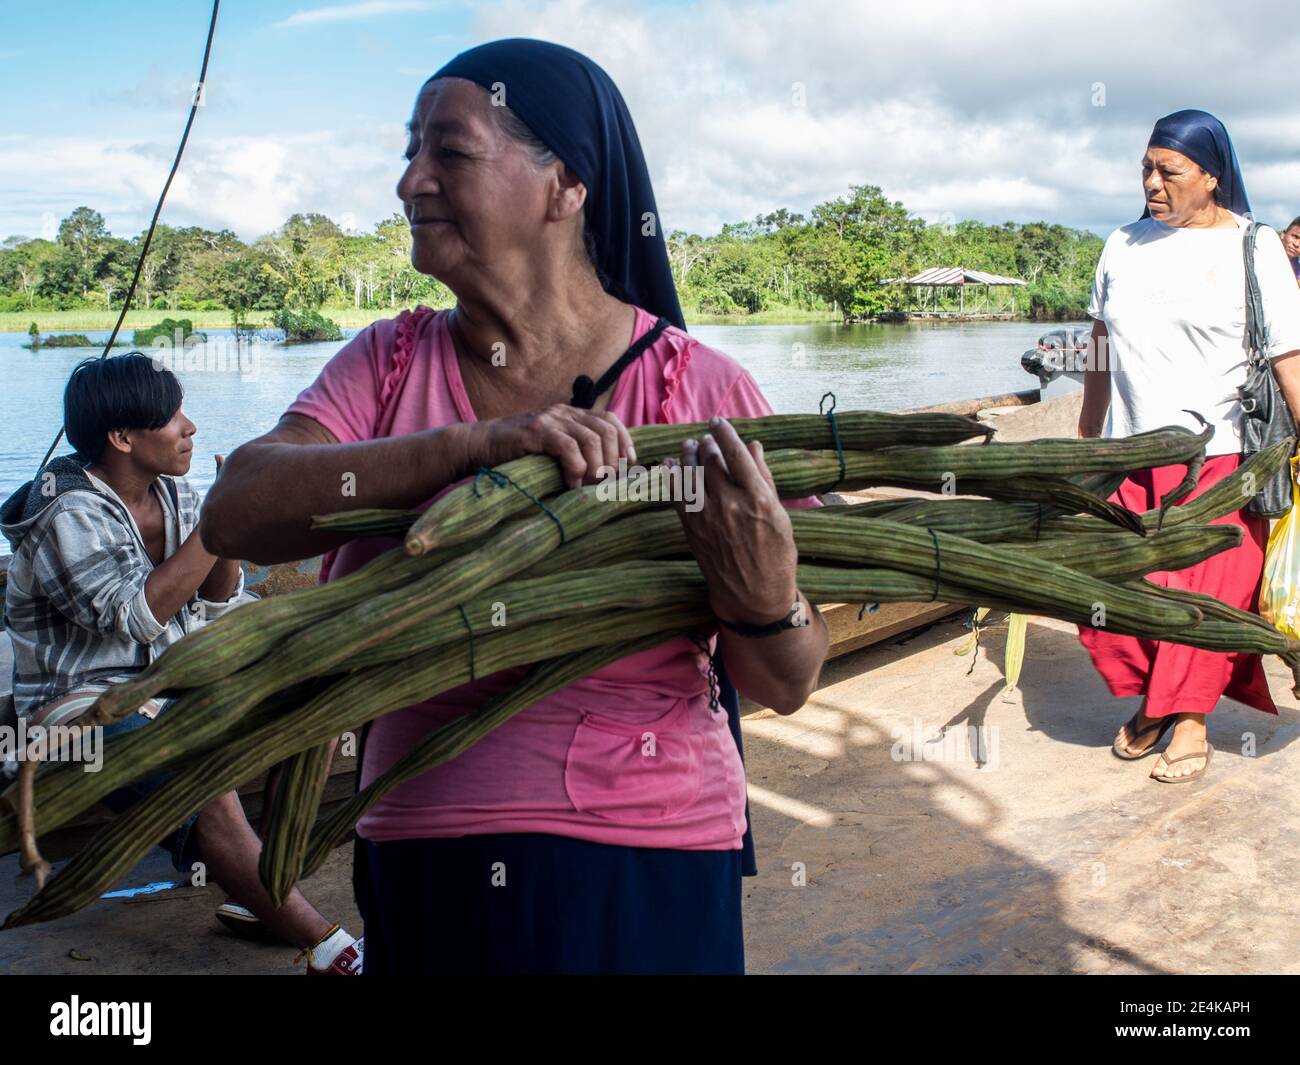 Amazon river, Peru - Dec 03, 2018: Life style. Local woman selling fruit (guama, guaba, pepeto, paterna or inga) on the ferry from Santa Rosa to Iquit Stock Photo